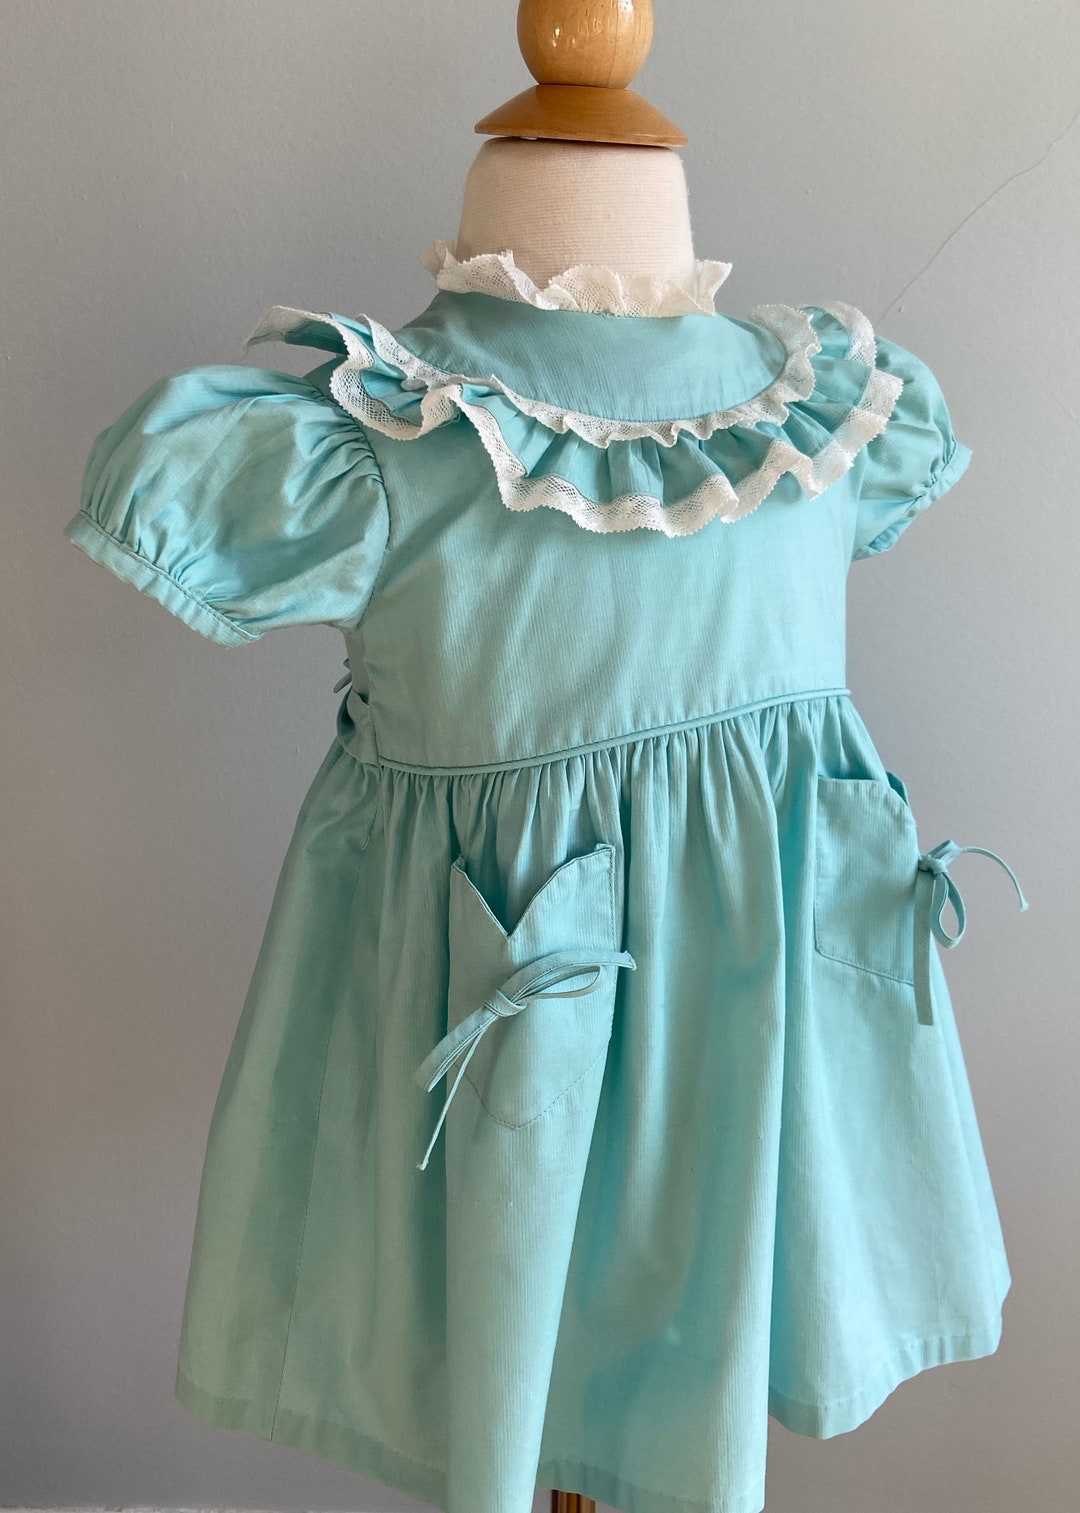 Vintage 1950s tiny Town Togs Girls Dress - Etsy